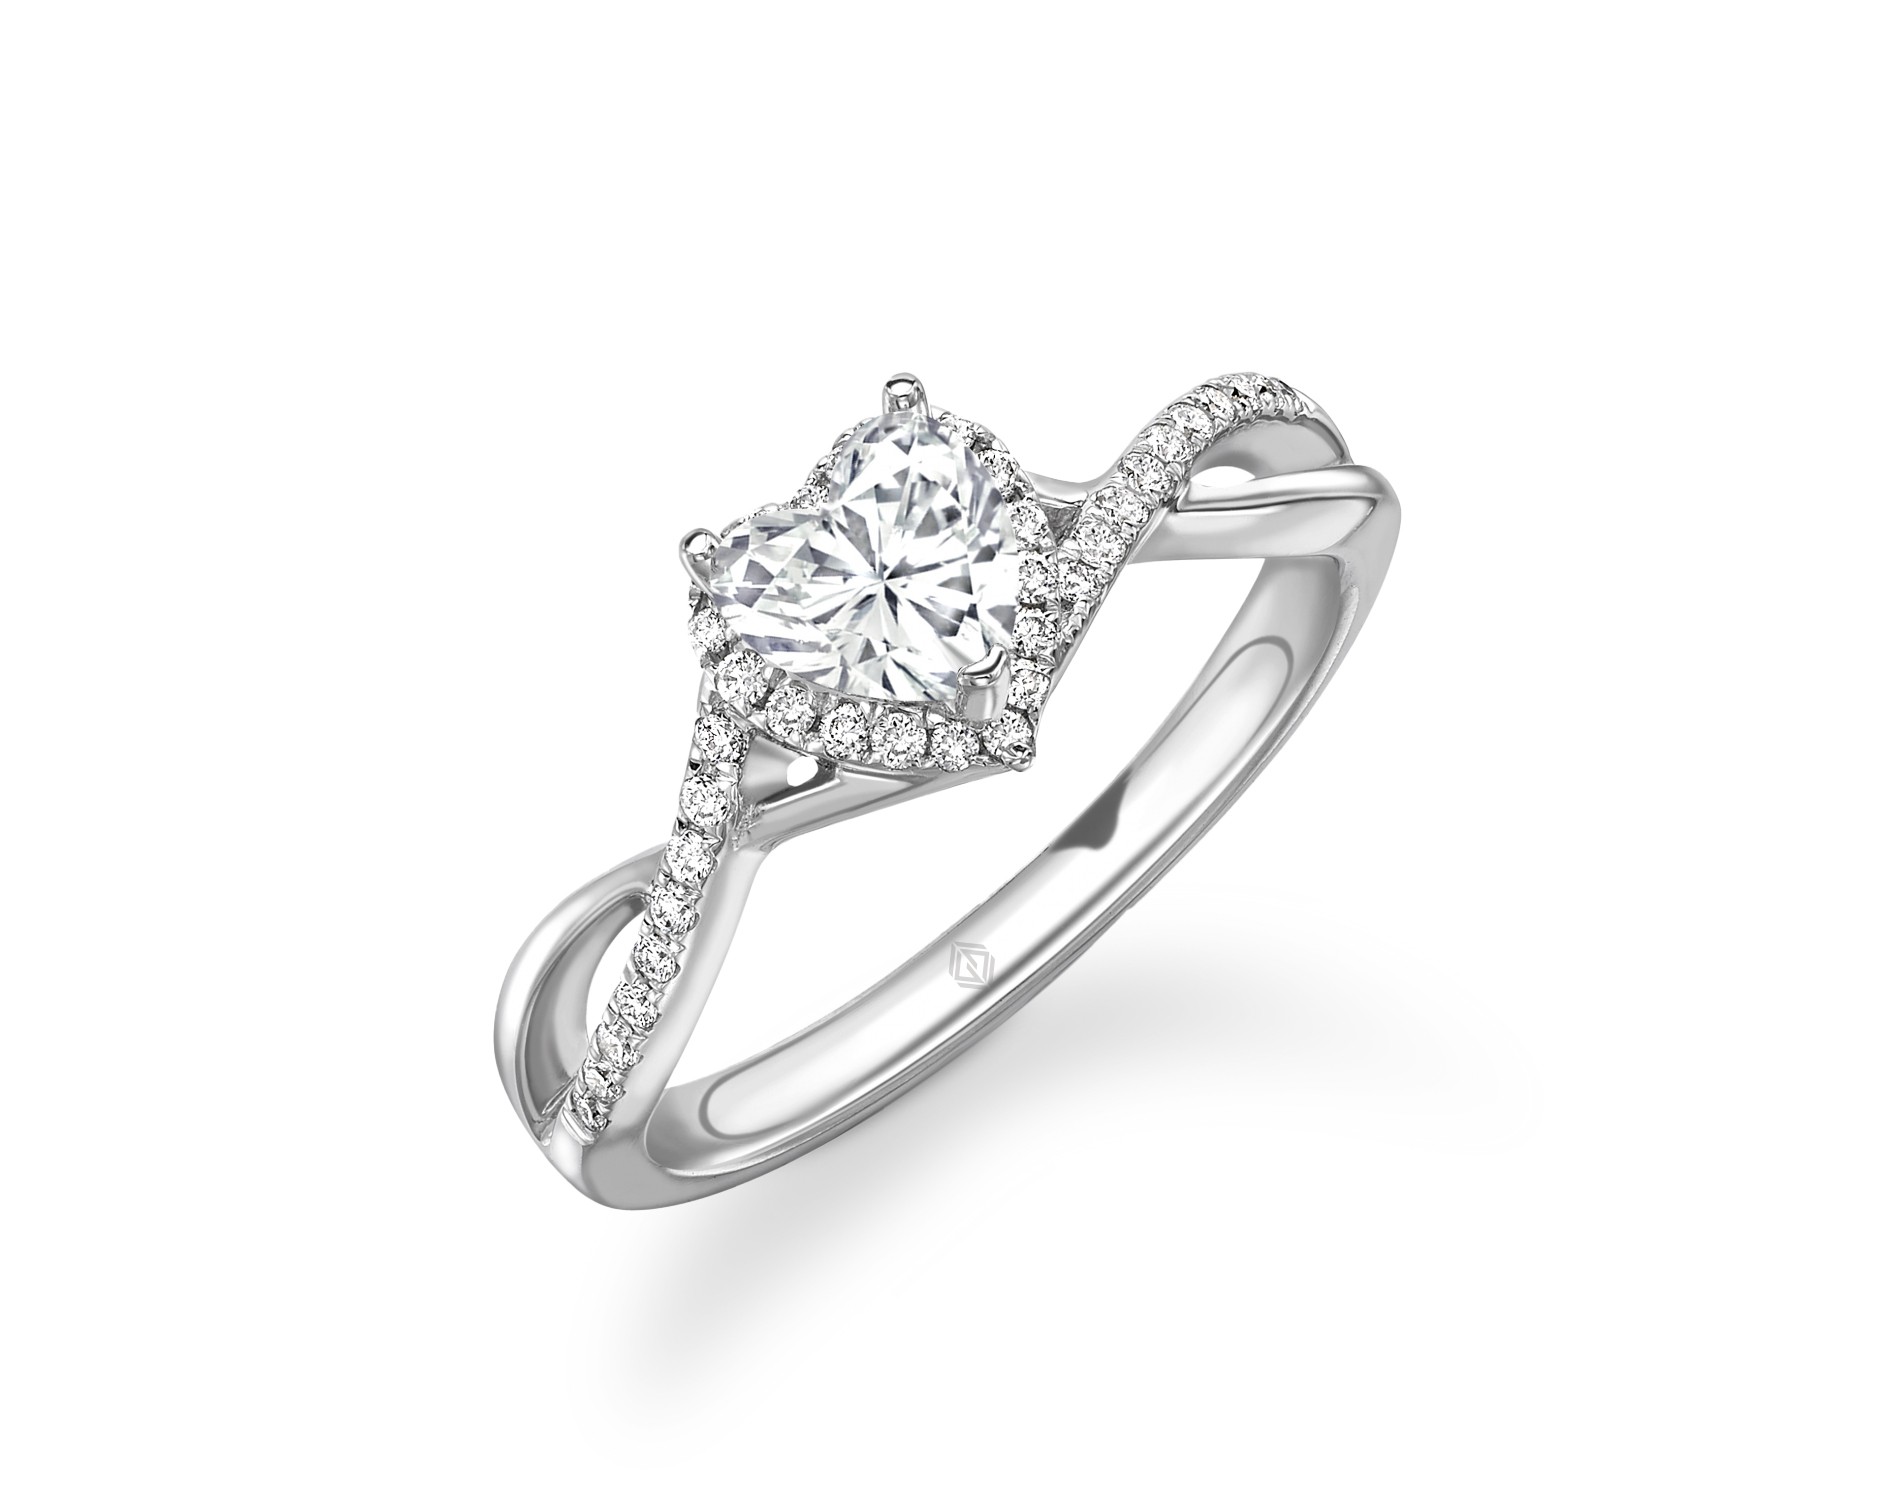 18K WHITE GOLD HEART CUT HALO DIAMOND ENGAGEMENT RING WITH SIDE STONES IN TWISTED SHANK PAVE SET